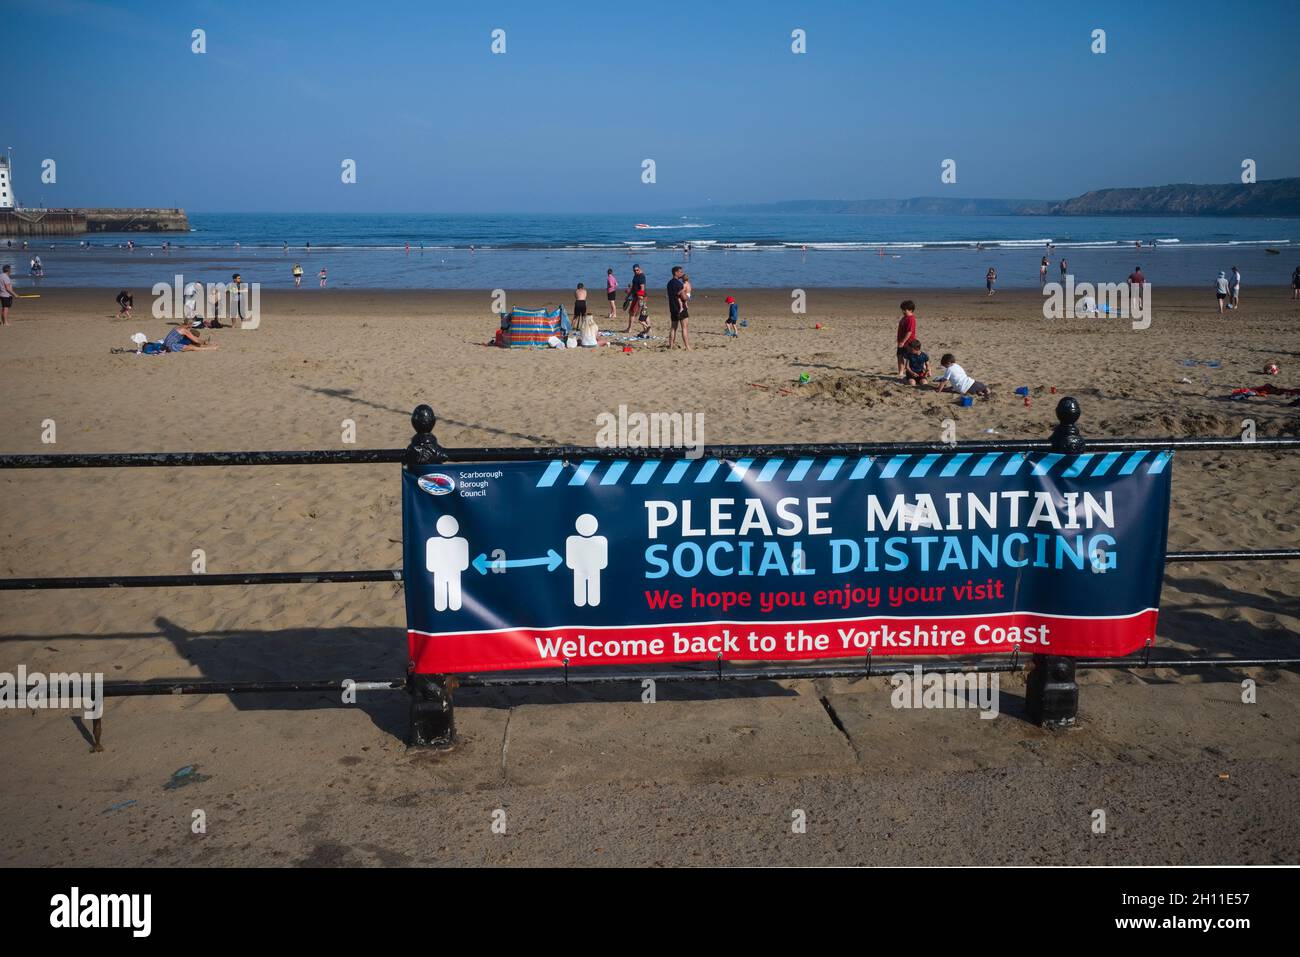 Poster on seaside railings in Scarborough asking people to maintain social distancing Stock Photo